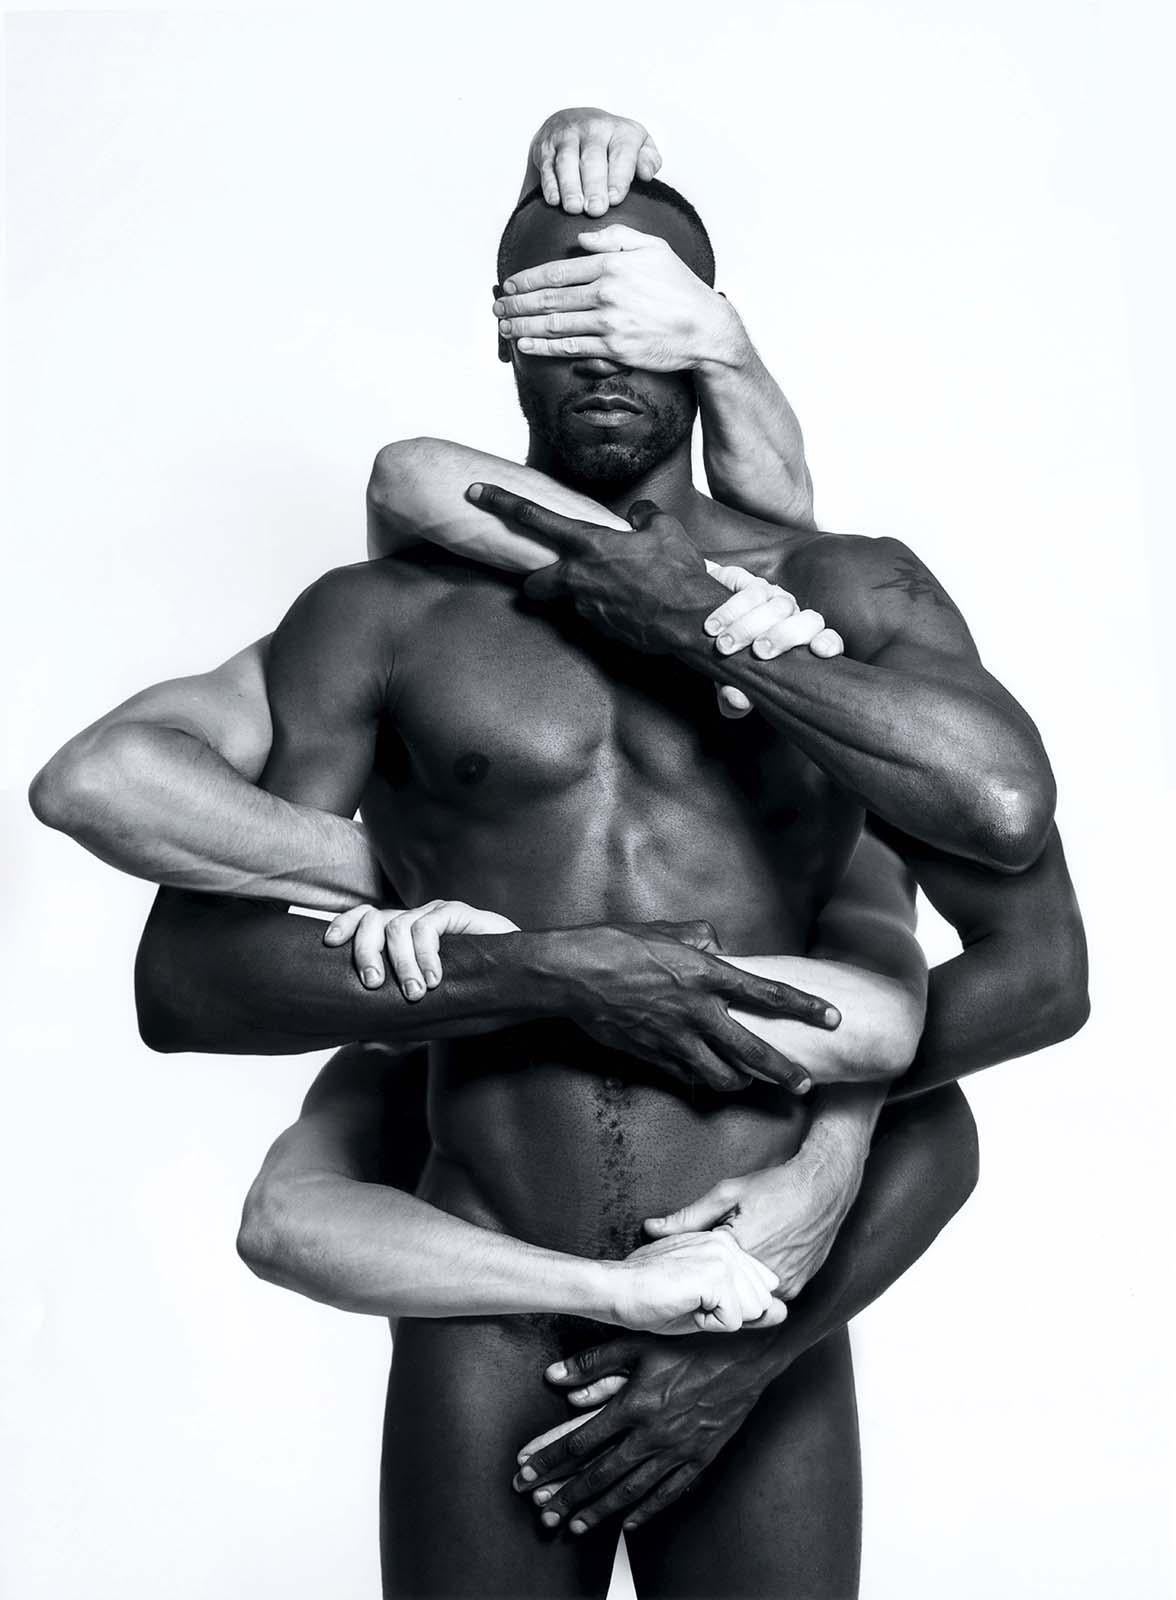 Omer Ga'ash Figurative Photograph - Forced Unbound (Black and white bodies intertwined in Body to Body Series)